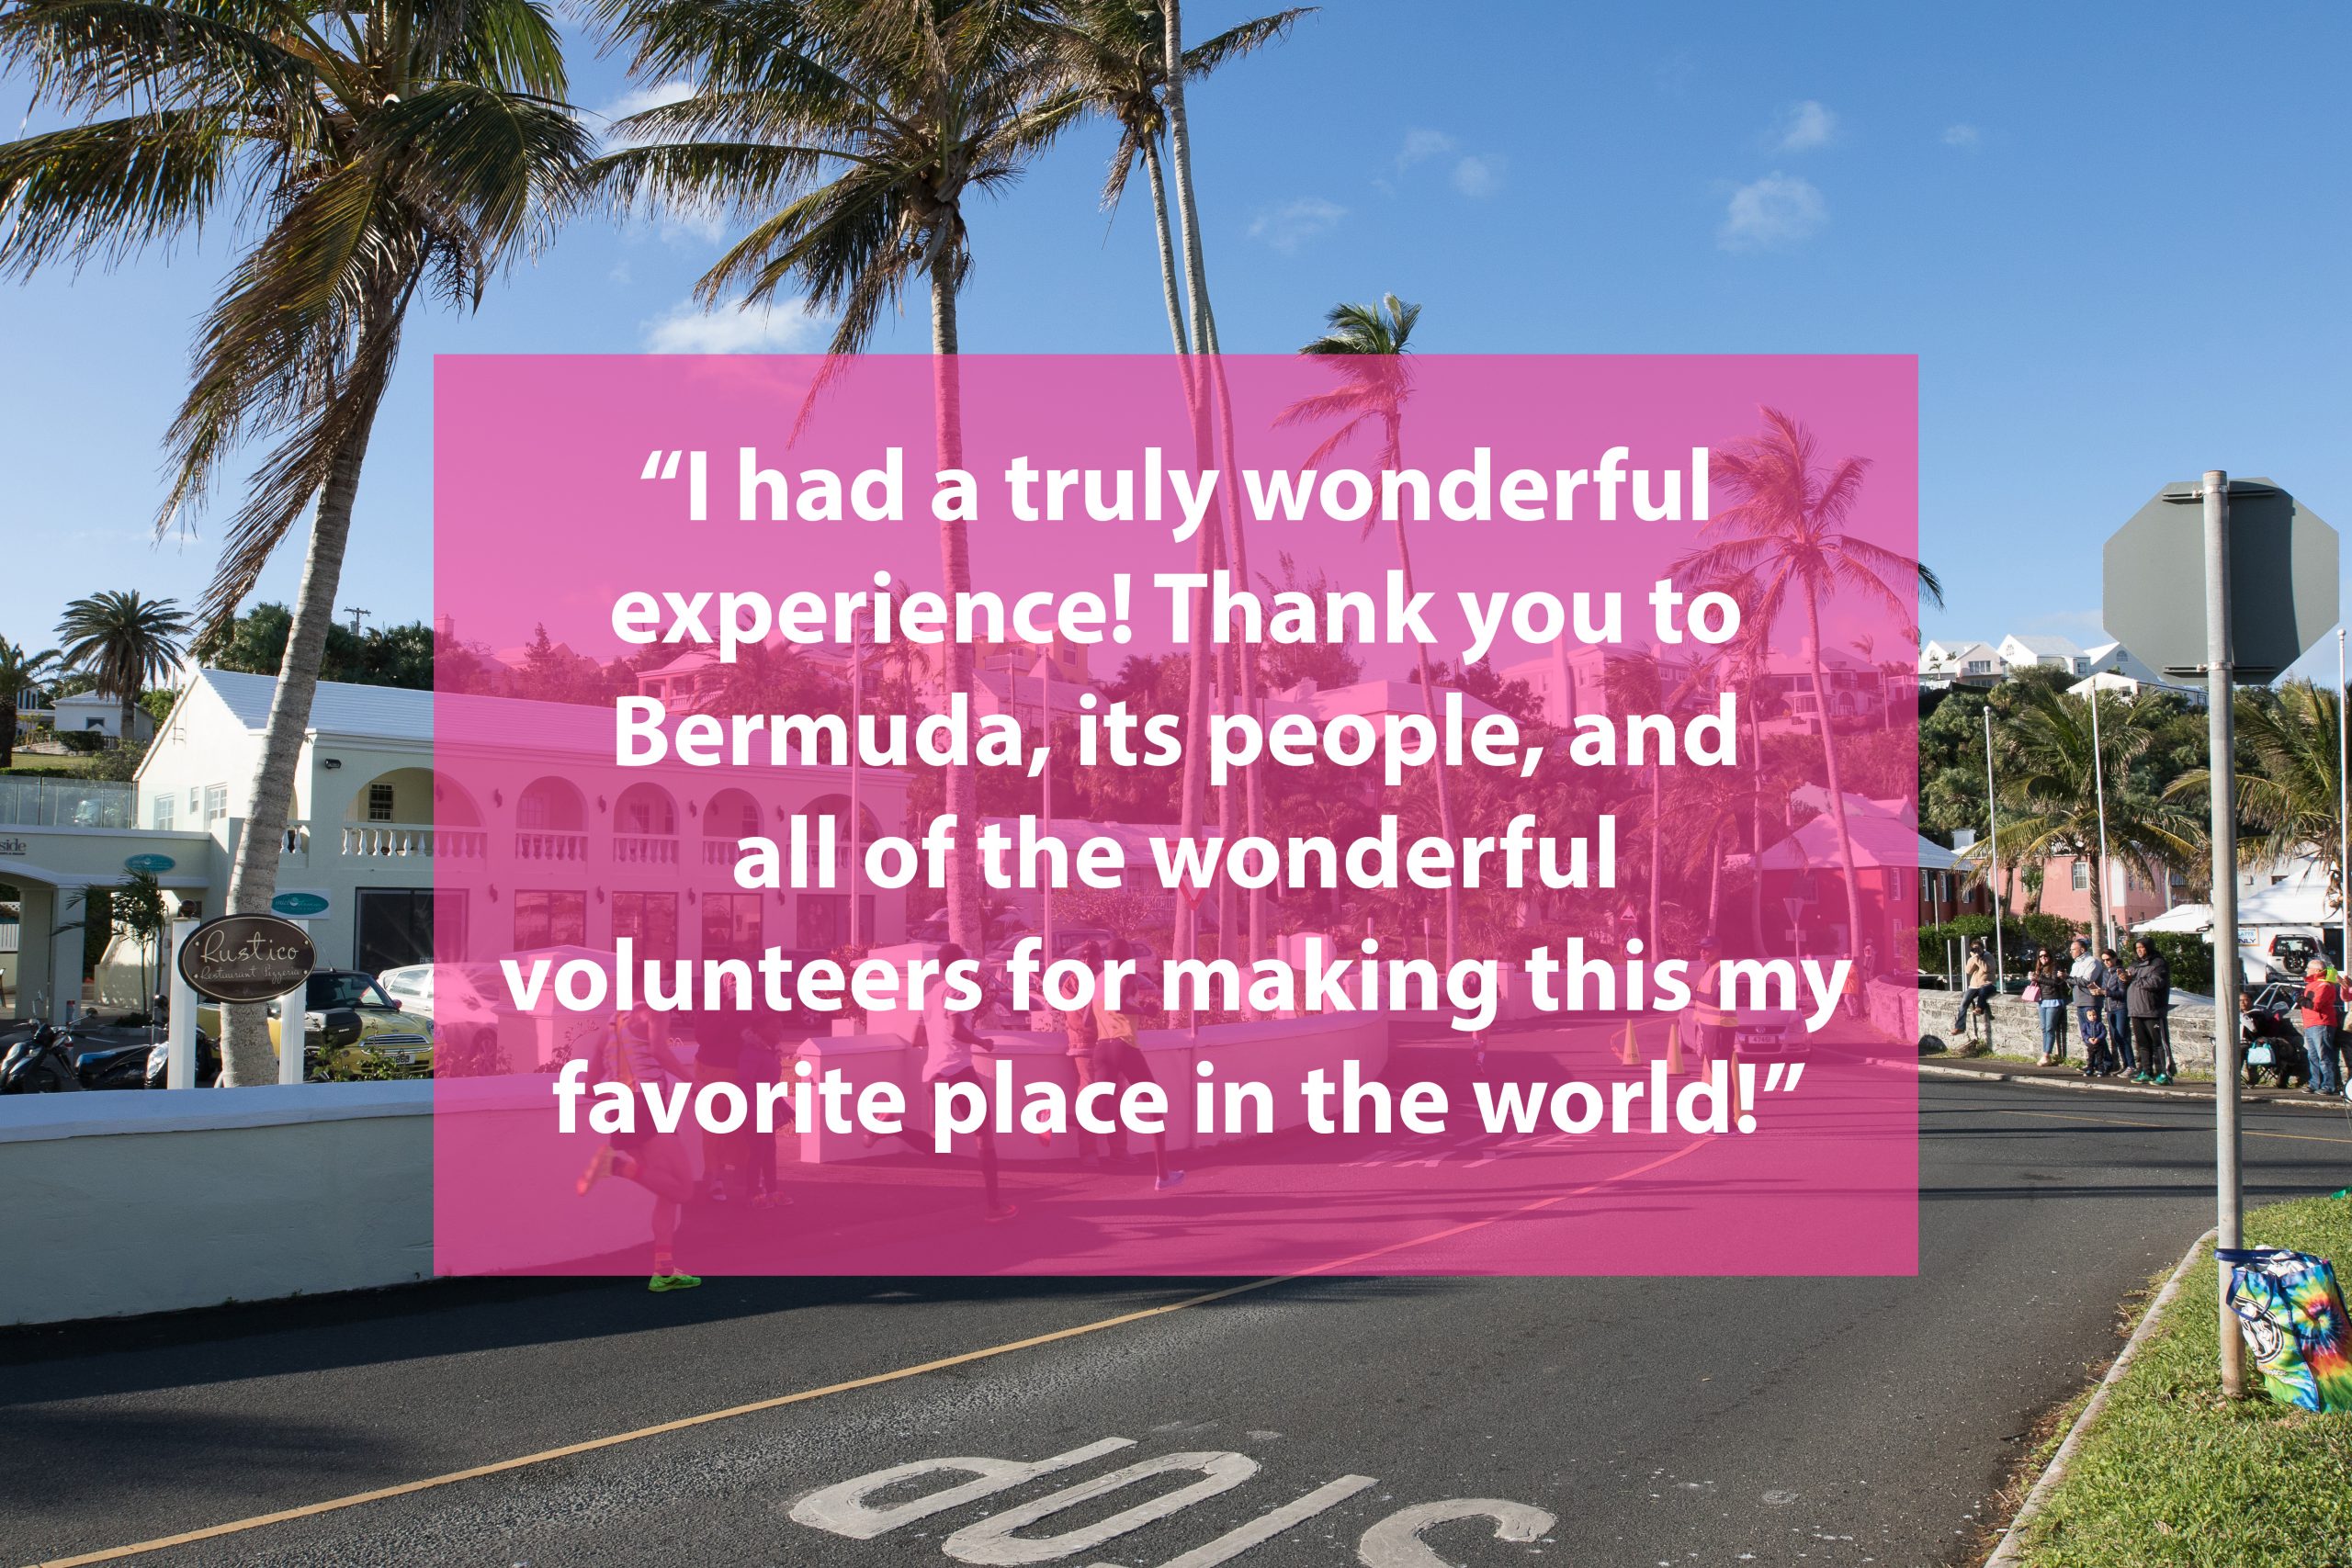 A runner testimony saying "I had a truly wonderful experience! Thank you to Bermuda, its people, and all of the wonderful volunteers for making this my favorite place in the world."